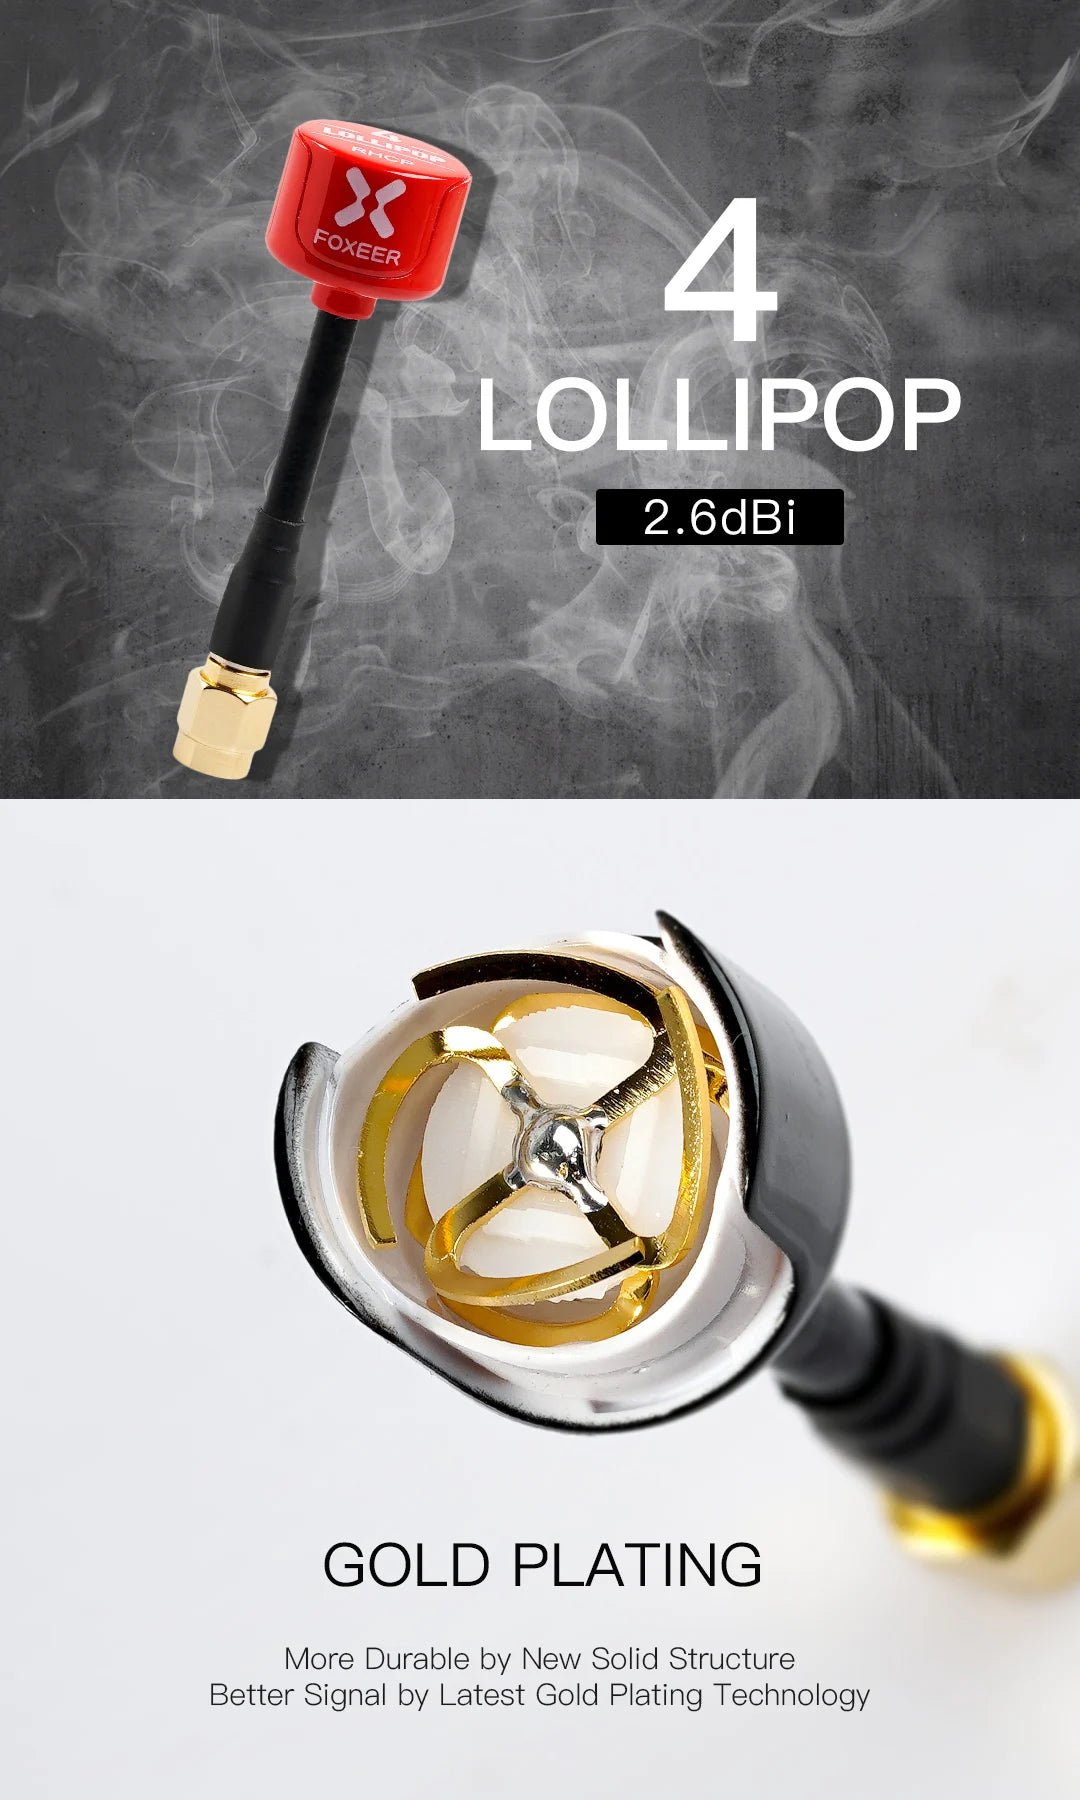 Foxeer Antenna, 4 LOLLIPOP 2.6dBi GOLD PLATING More Durable by New